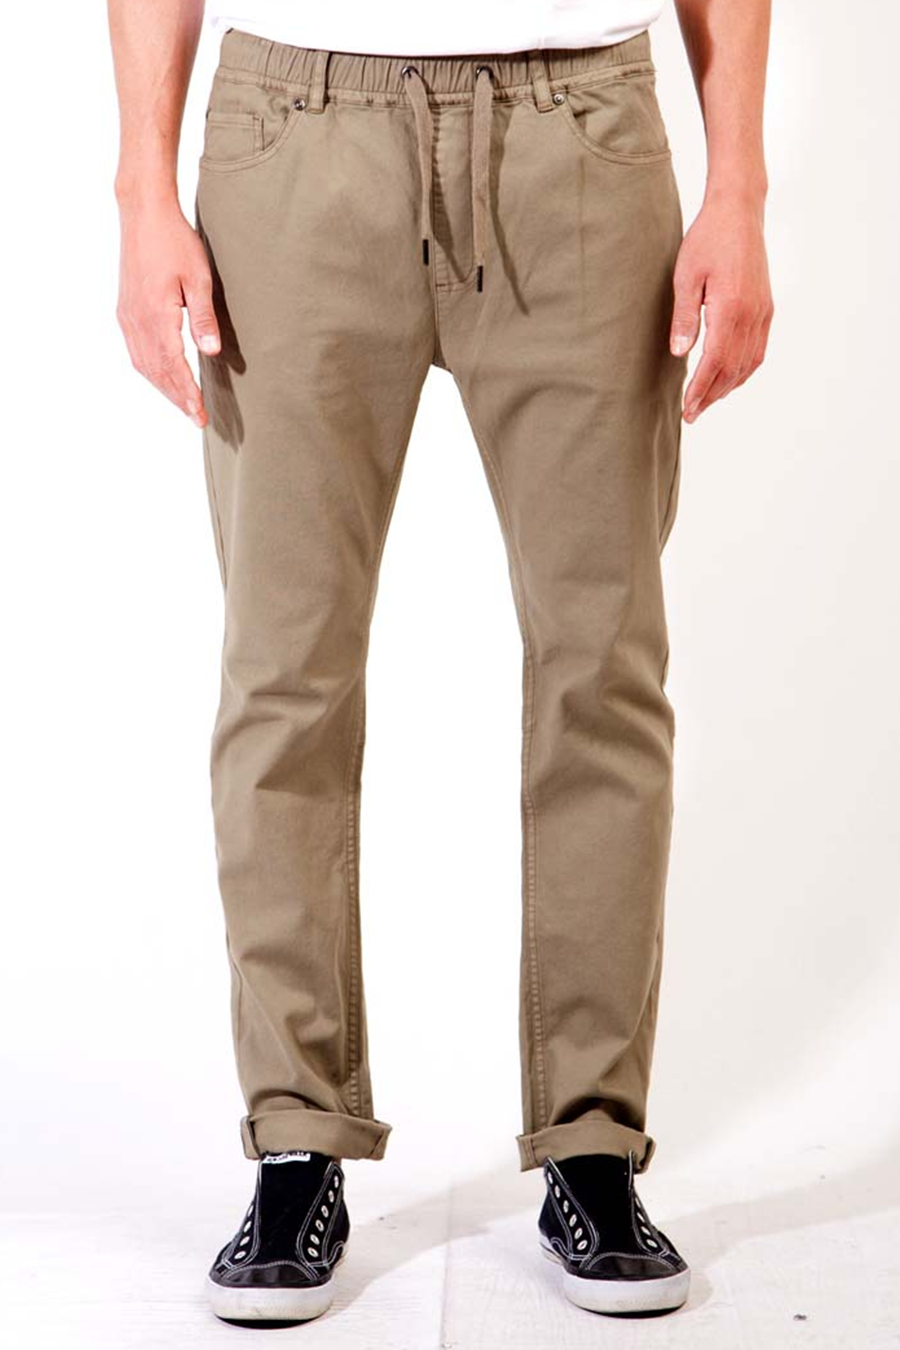 Edwin Slouch Pant | Light Olive - Main Image Number 1 of 2